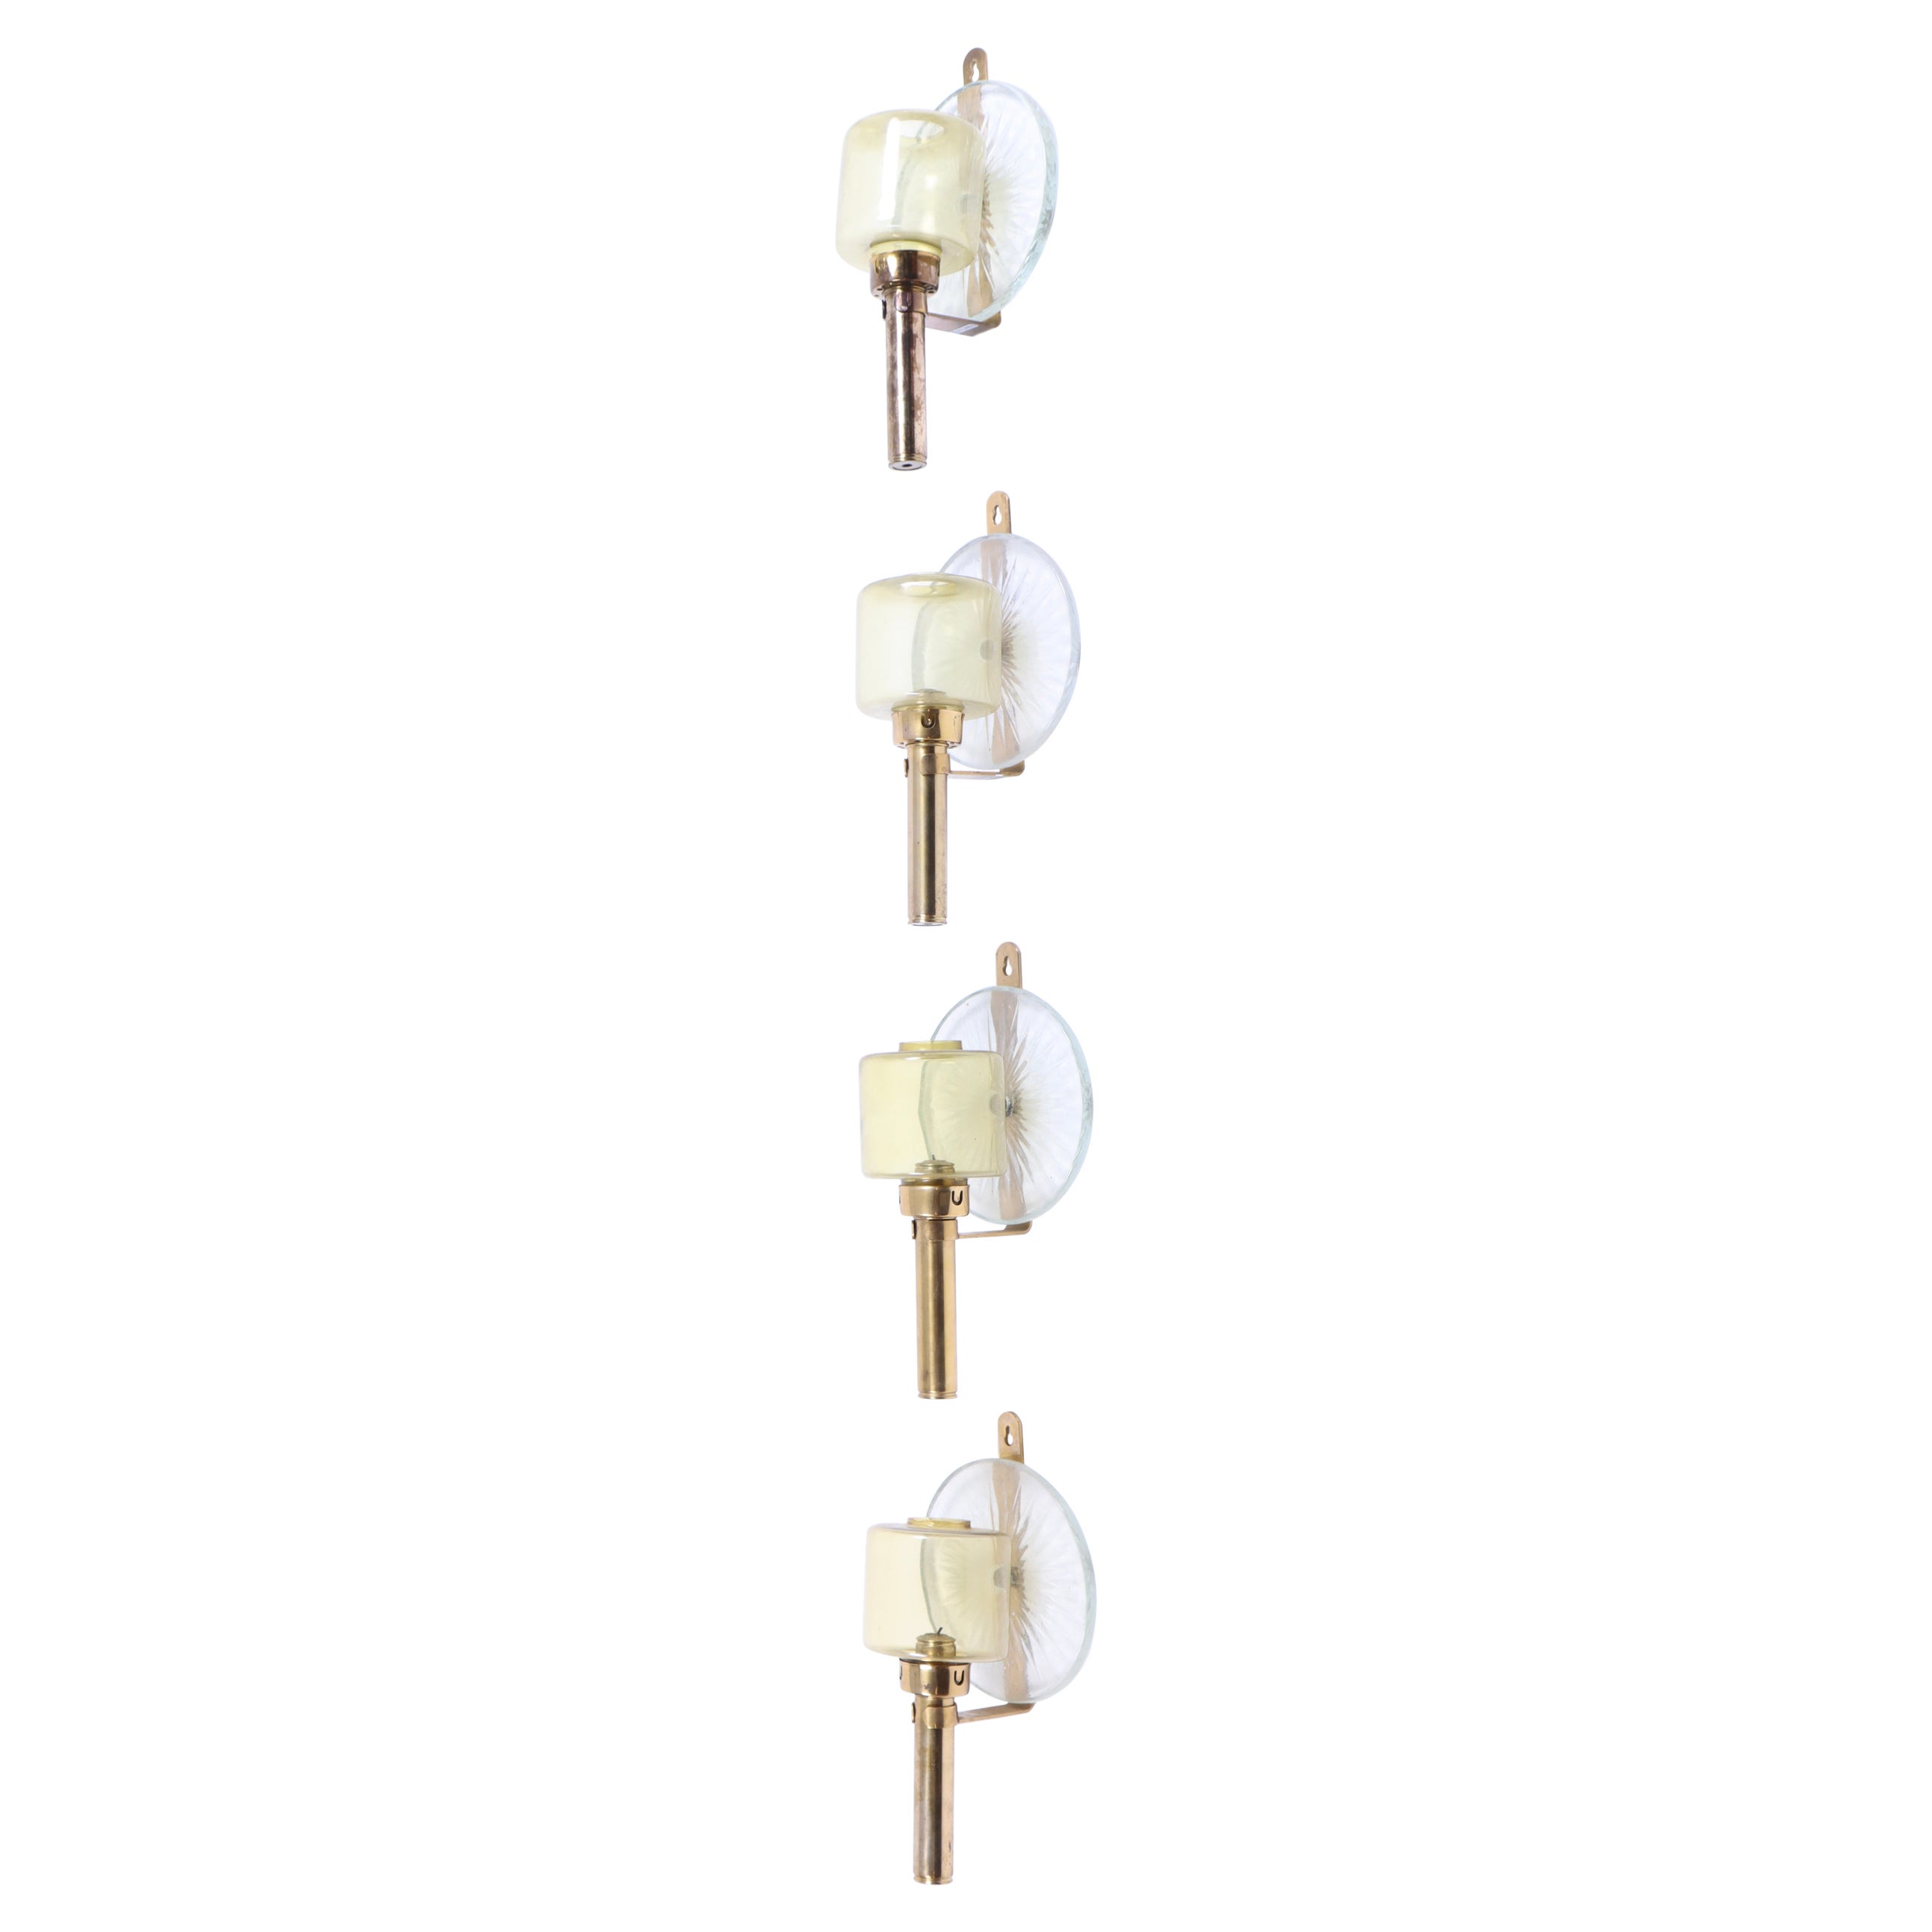 Set of Four Midcentury Wall Candelabras in Brass, Made in Sweden 1950s For Sale